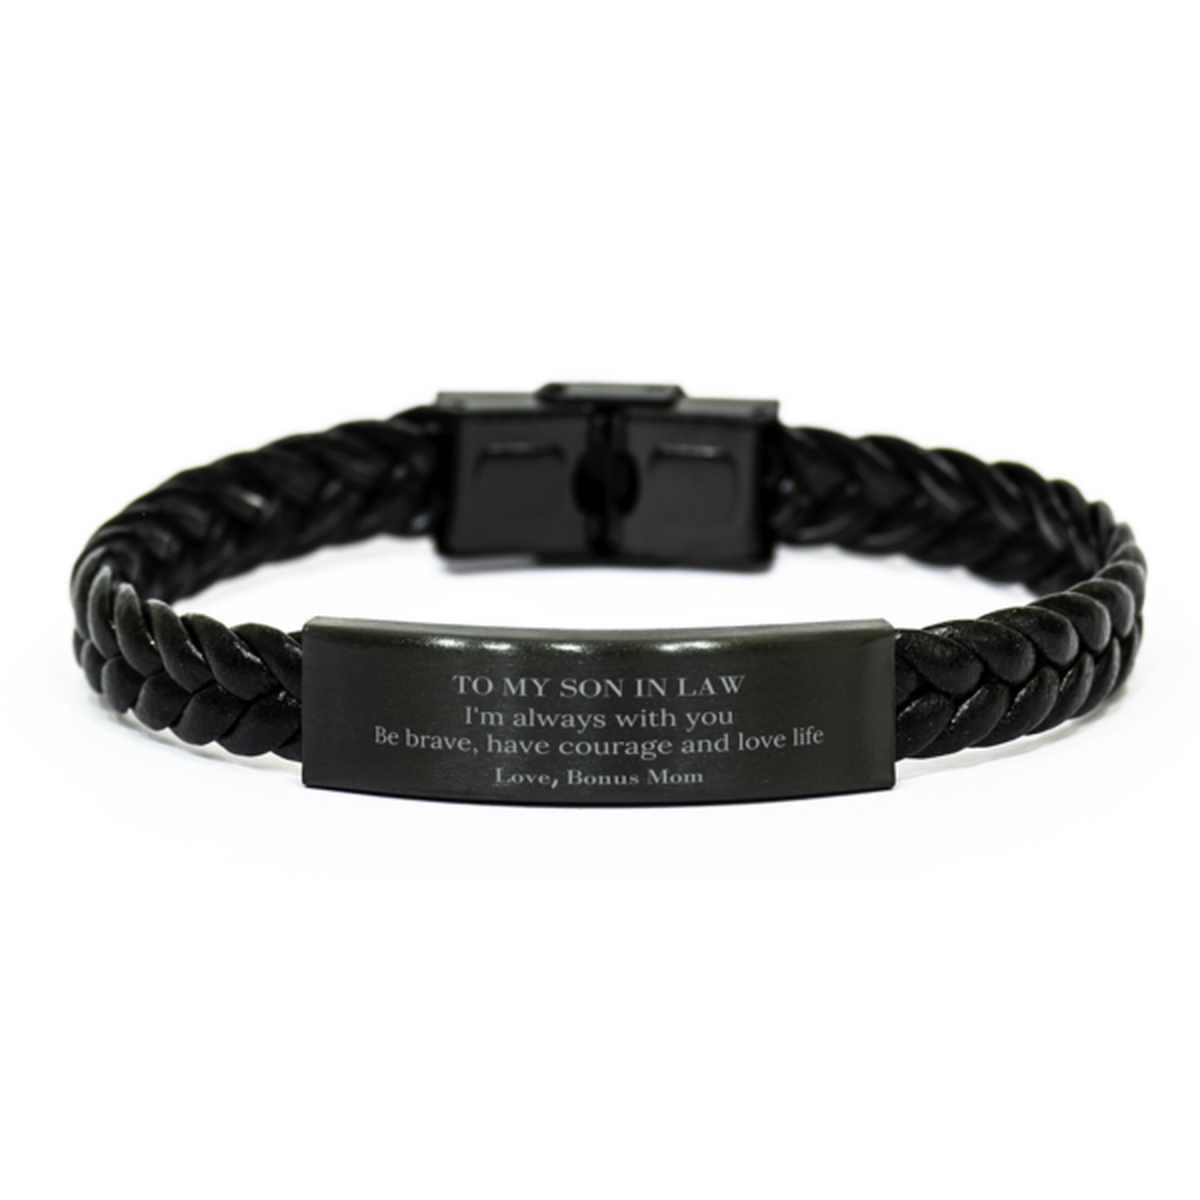 To My Son In Law Gifts from Bonus Mom, Unique Braided Leather Bracelet Inspirational Christmas Birthday Graduation Gifts for Son In Law I'm always with you. Be brave, have courage and love life. Love, Bonus Mom